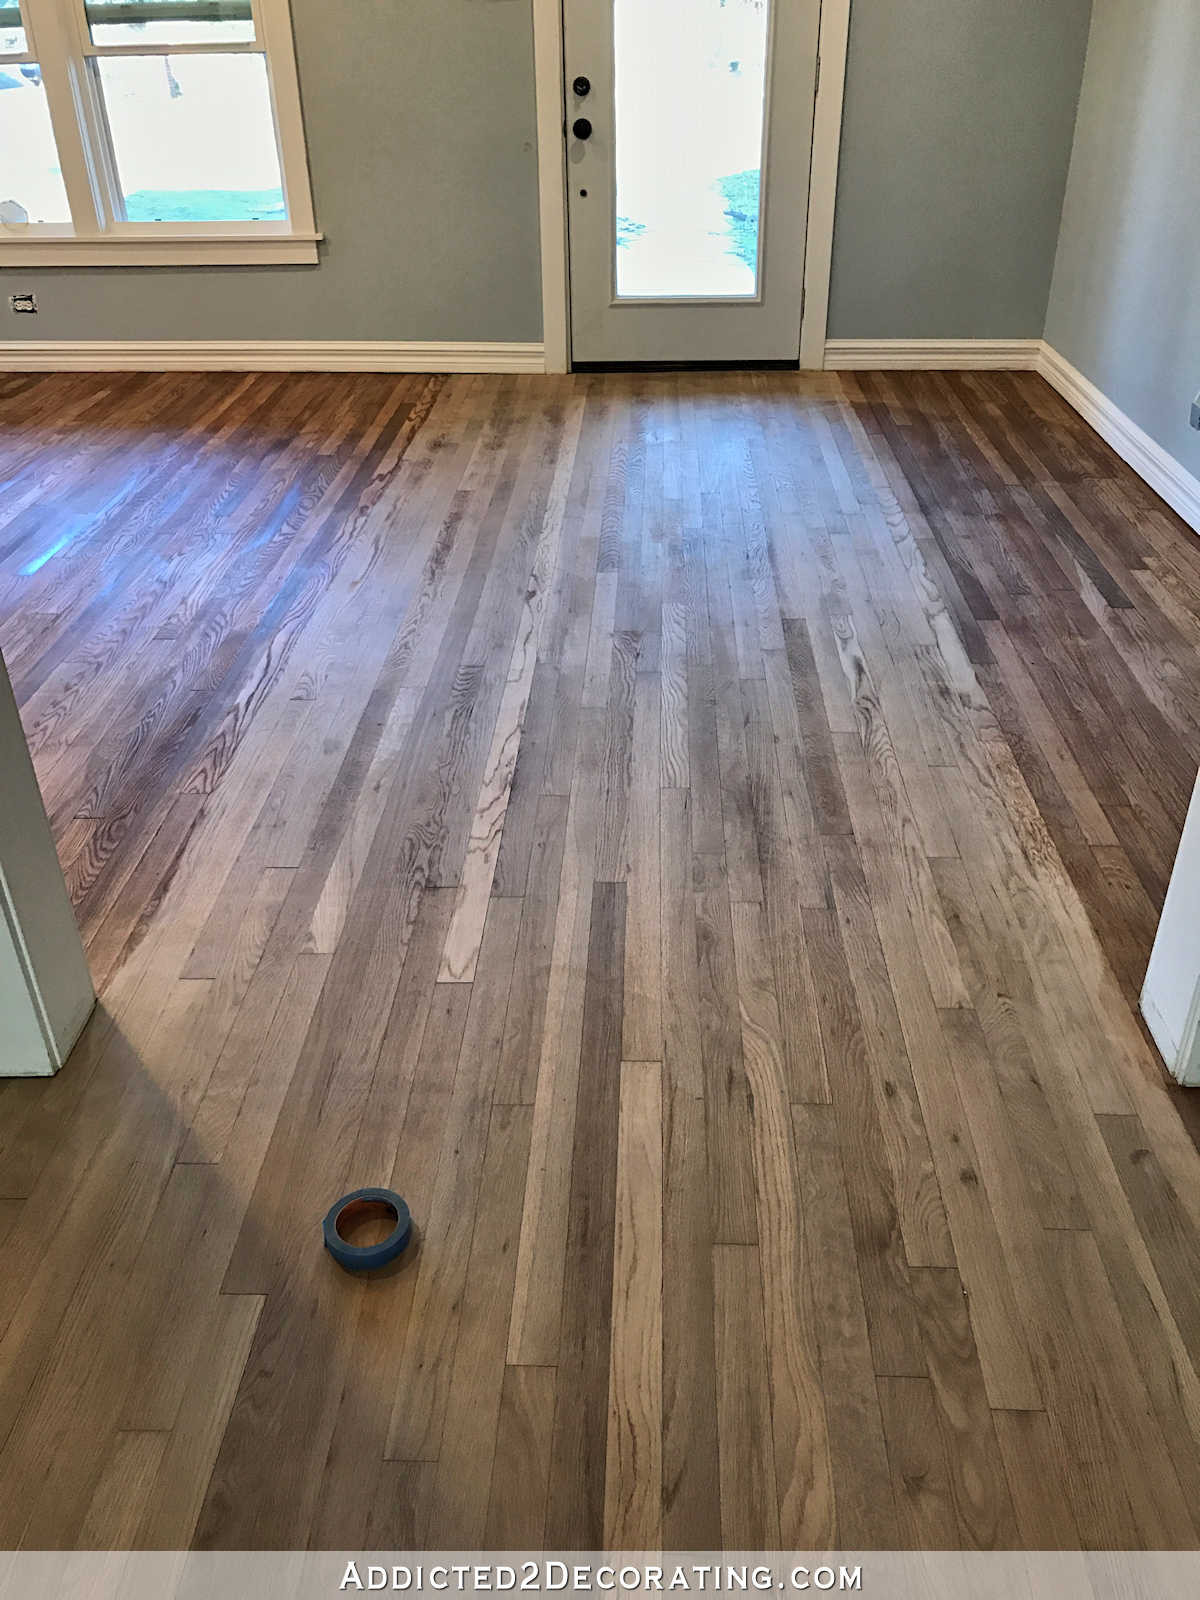 2 1 4 white oak hardwood flooring of adventures in staining my red oak hardwood floors products process intended for staining red oak hardwood floors 4 entryway and living room wood conditioner